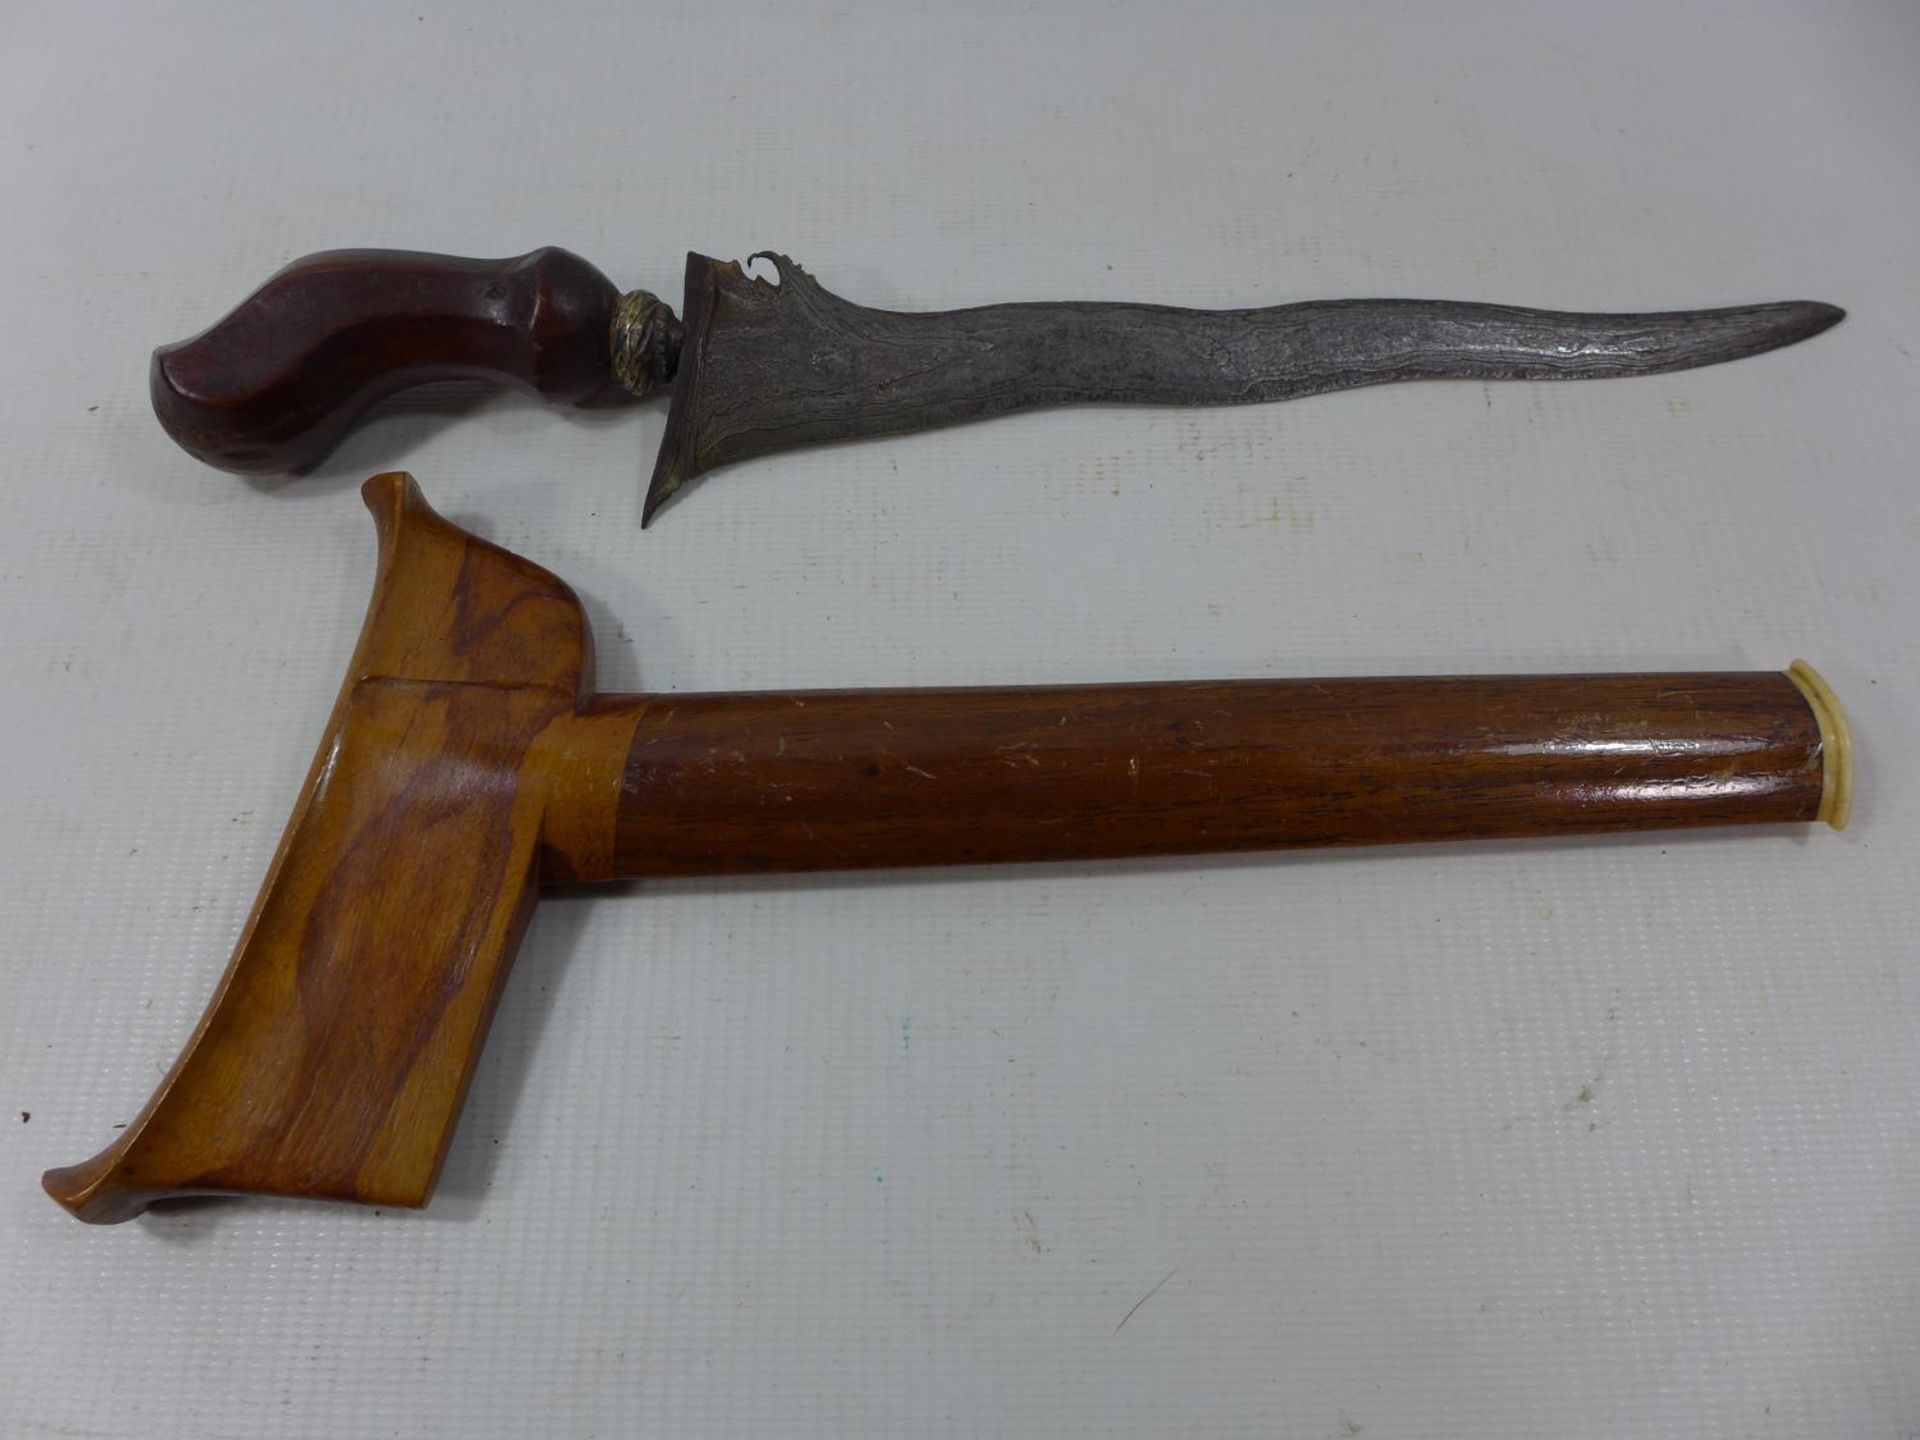 A BALANISE KRIS, 21CM WAVY BLADE, WOODEN GRIP AND SCABBARD - Image 2 of 3